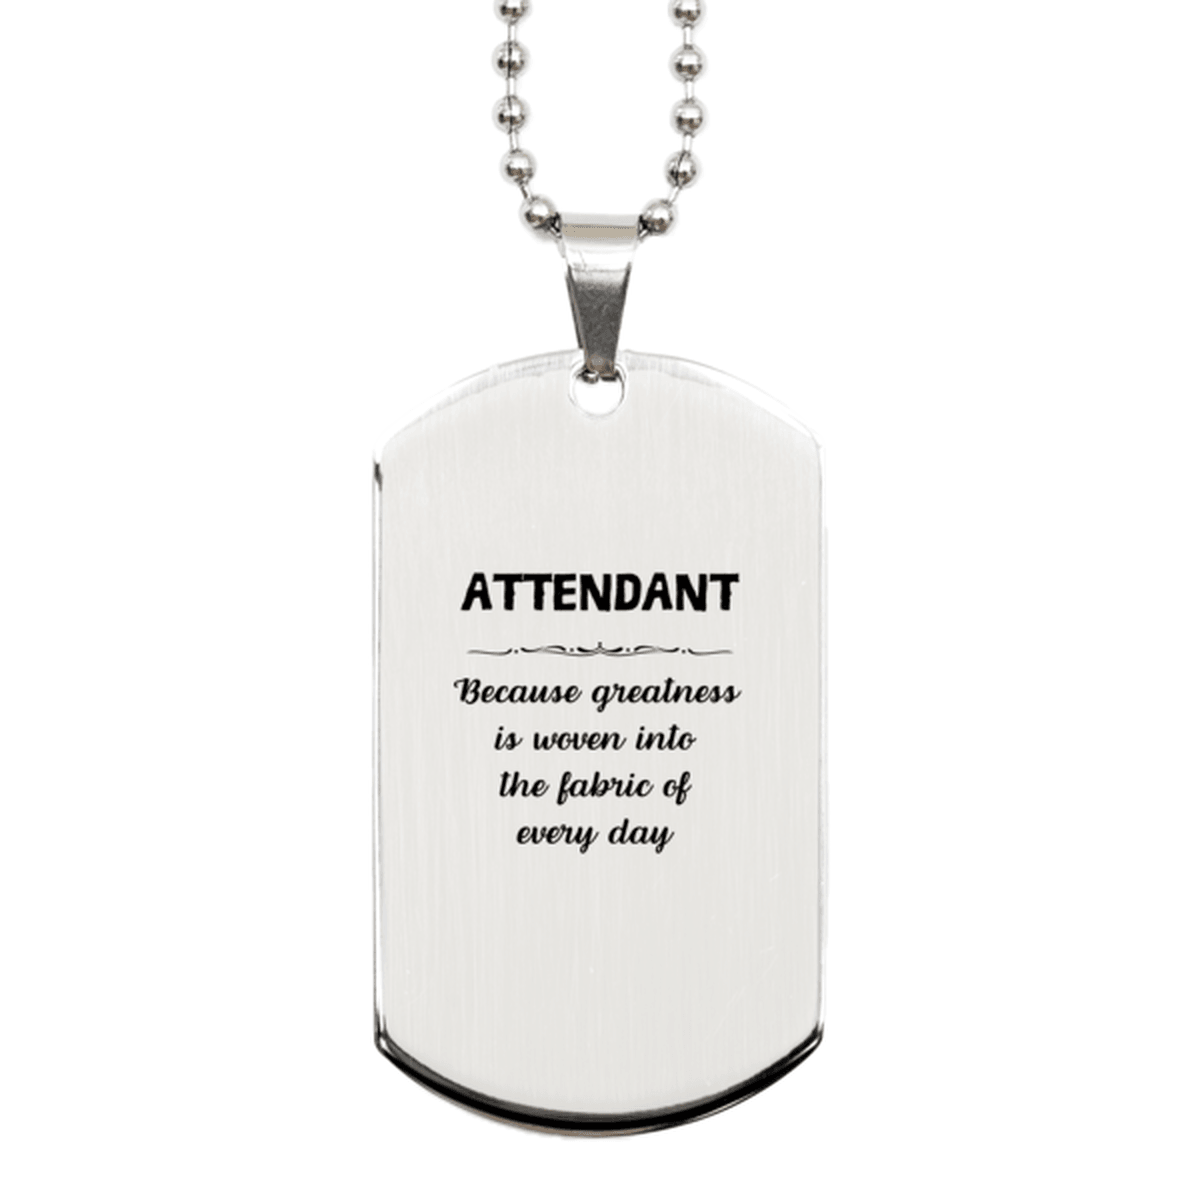 Sarcastic Attendant Silver Dog Tag Gifts, Christmas Holiday Gifts for Attendant Birthday, Attendant: Because greatness is woven into the fabric of every day, Coworkers, Friends - Mallard Moon Gift Shop